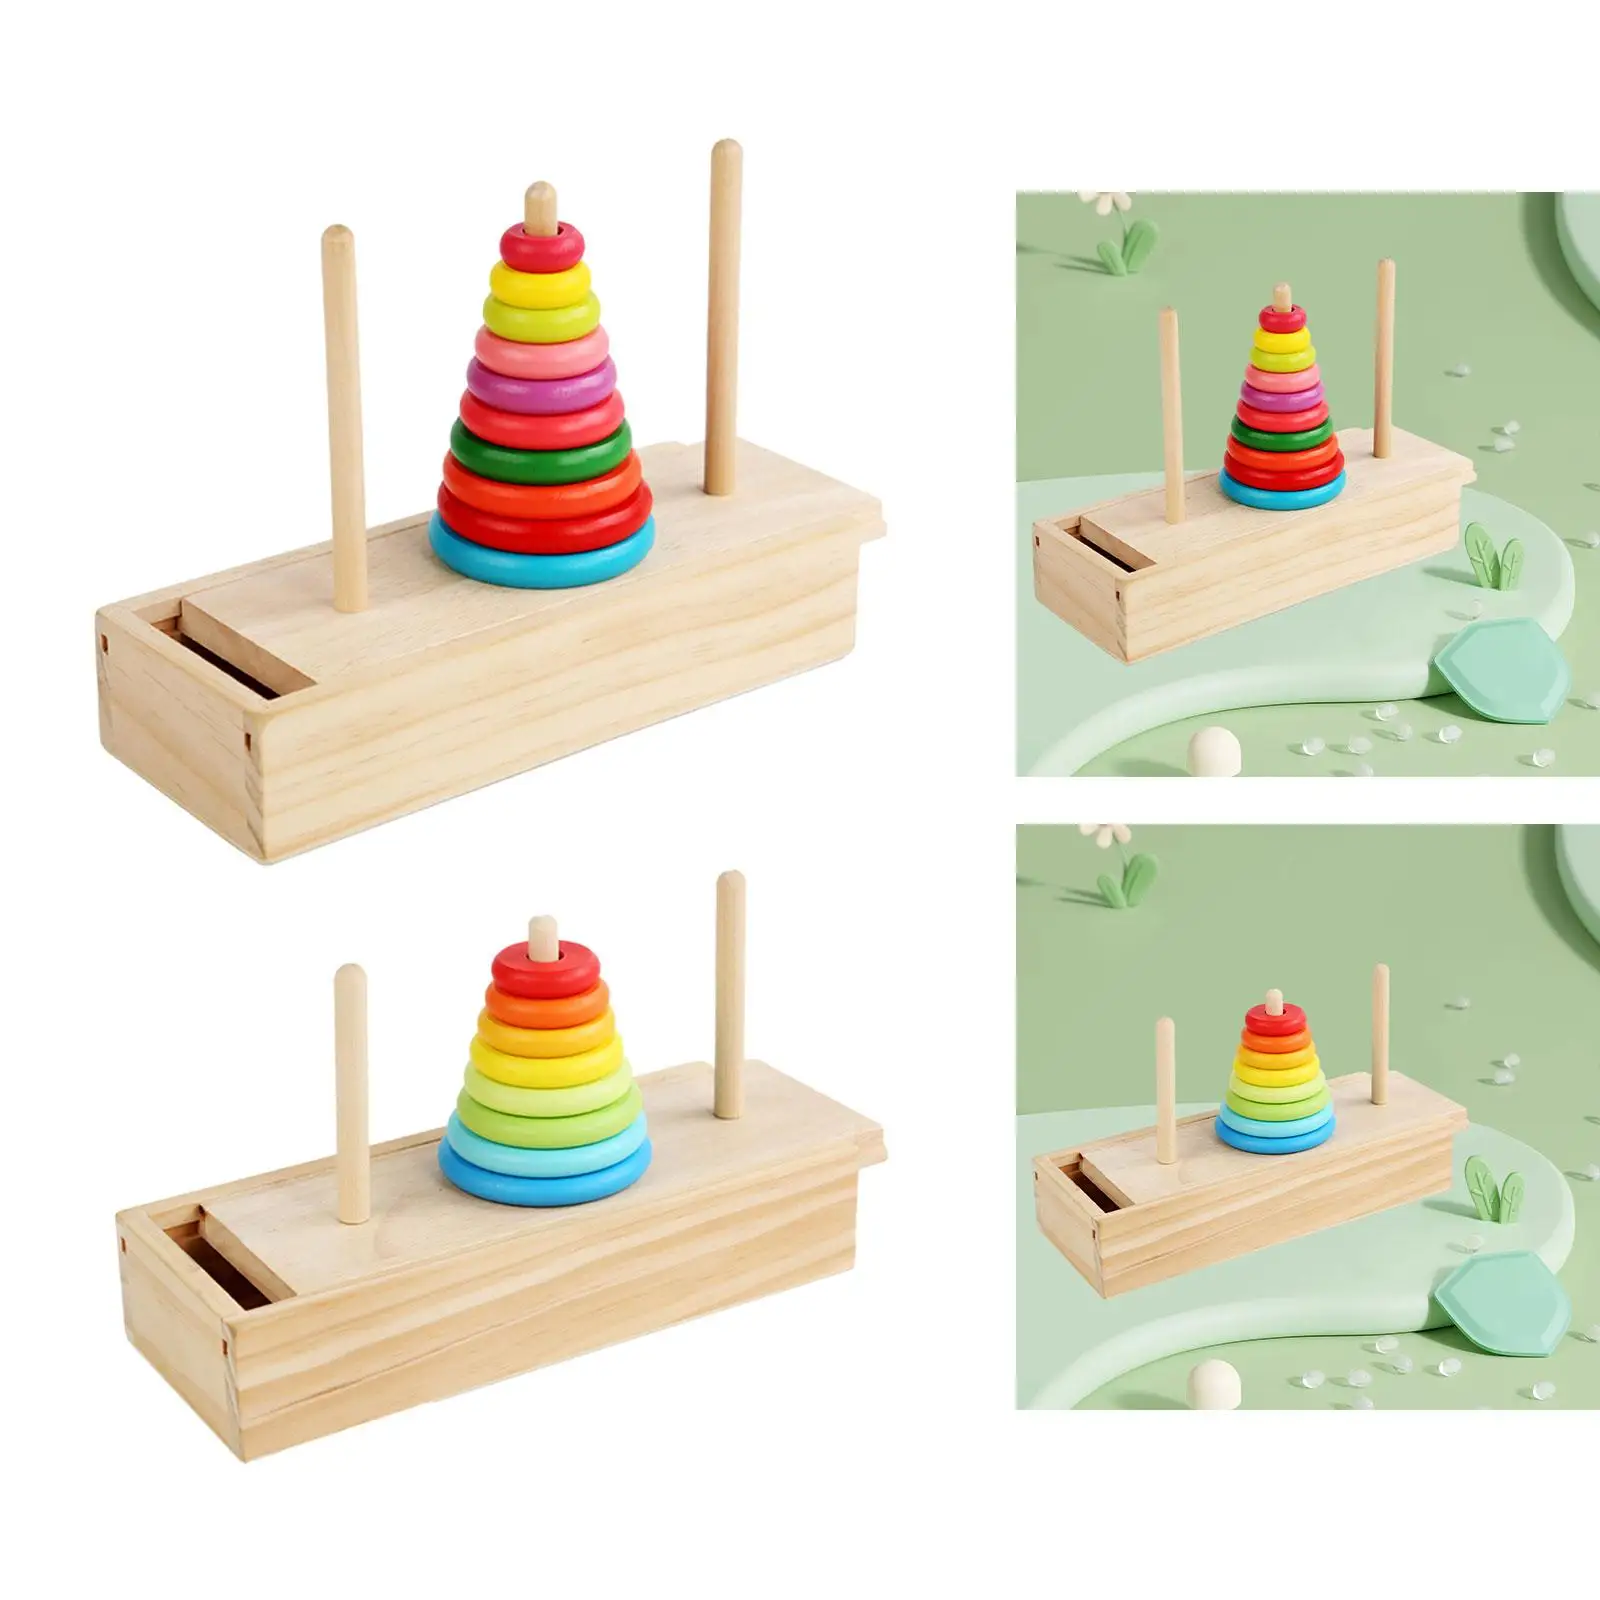 Wooden Stacking Tower Smooth Creative Practical for Boy Girls Baby Children